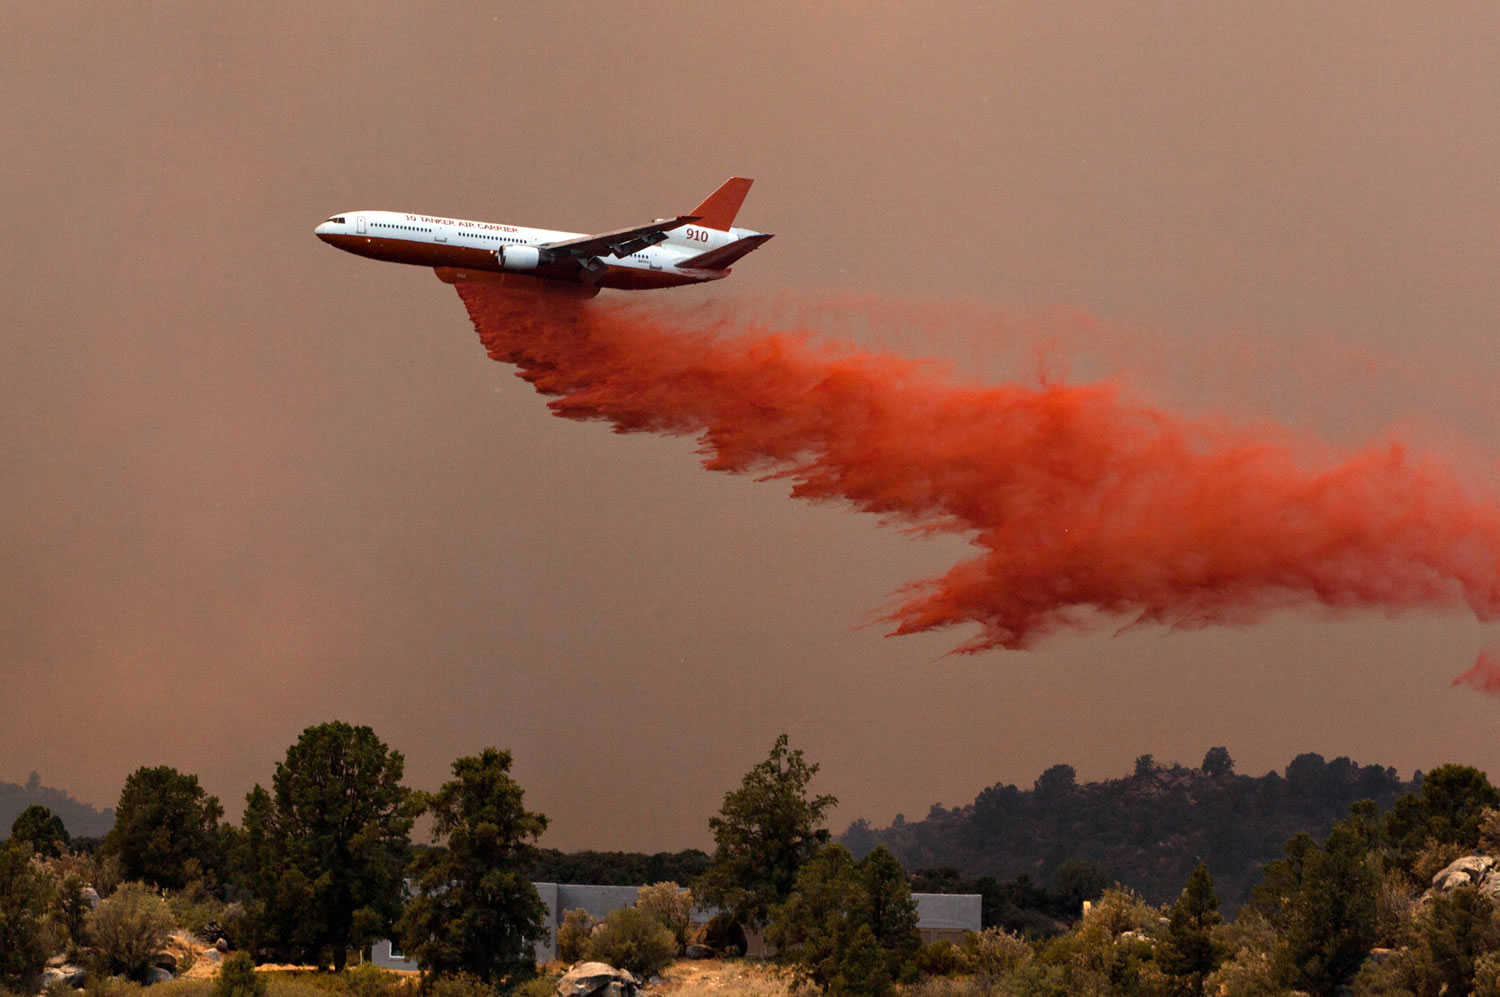 Tanker 910 makes a retardant drop on the Yarnell Hill fire to help protect the Double Bar A Ranch near Peeples Valley, Ariz., Sunday. The fire started Friday and picked up momentum as the area experienced high temperatures, low humidity and wind.